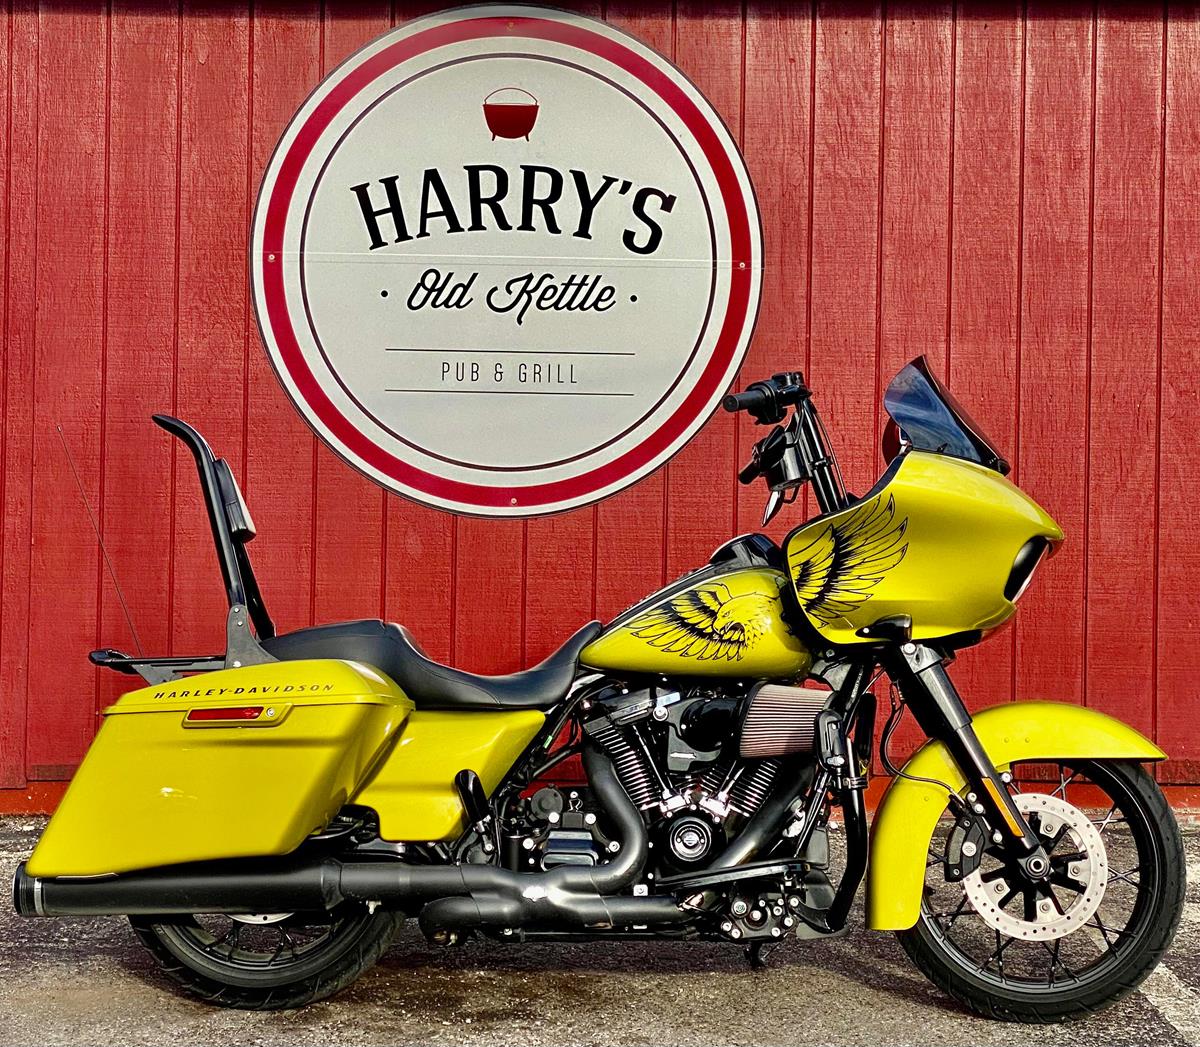 Harry&#39;s Old Kettle Pub and Grill to sponsor Heads Up Harley Event